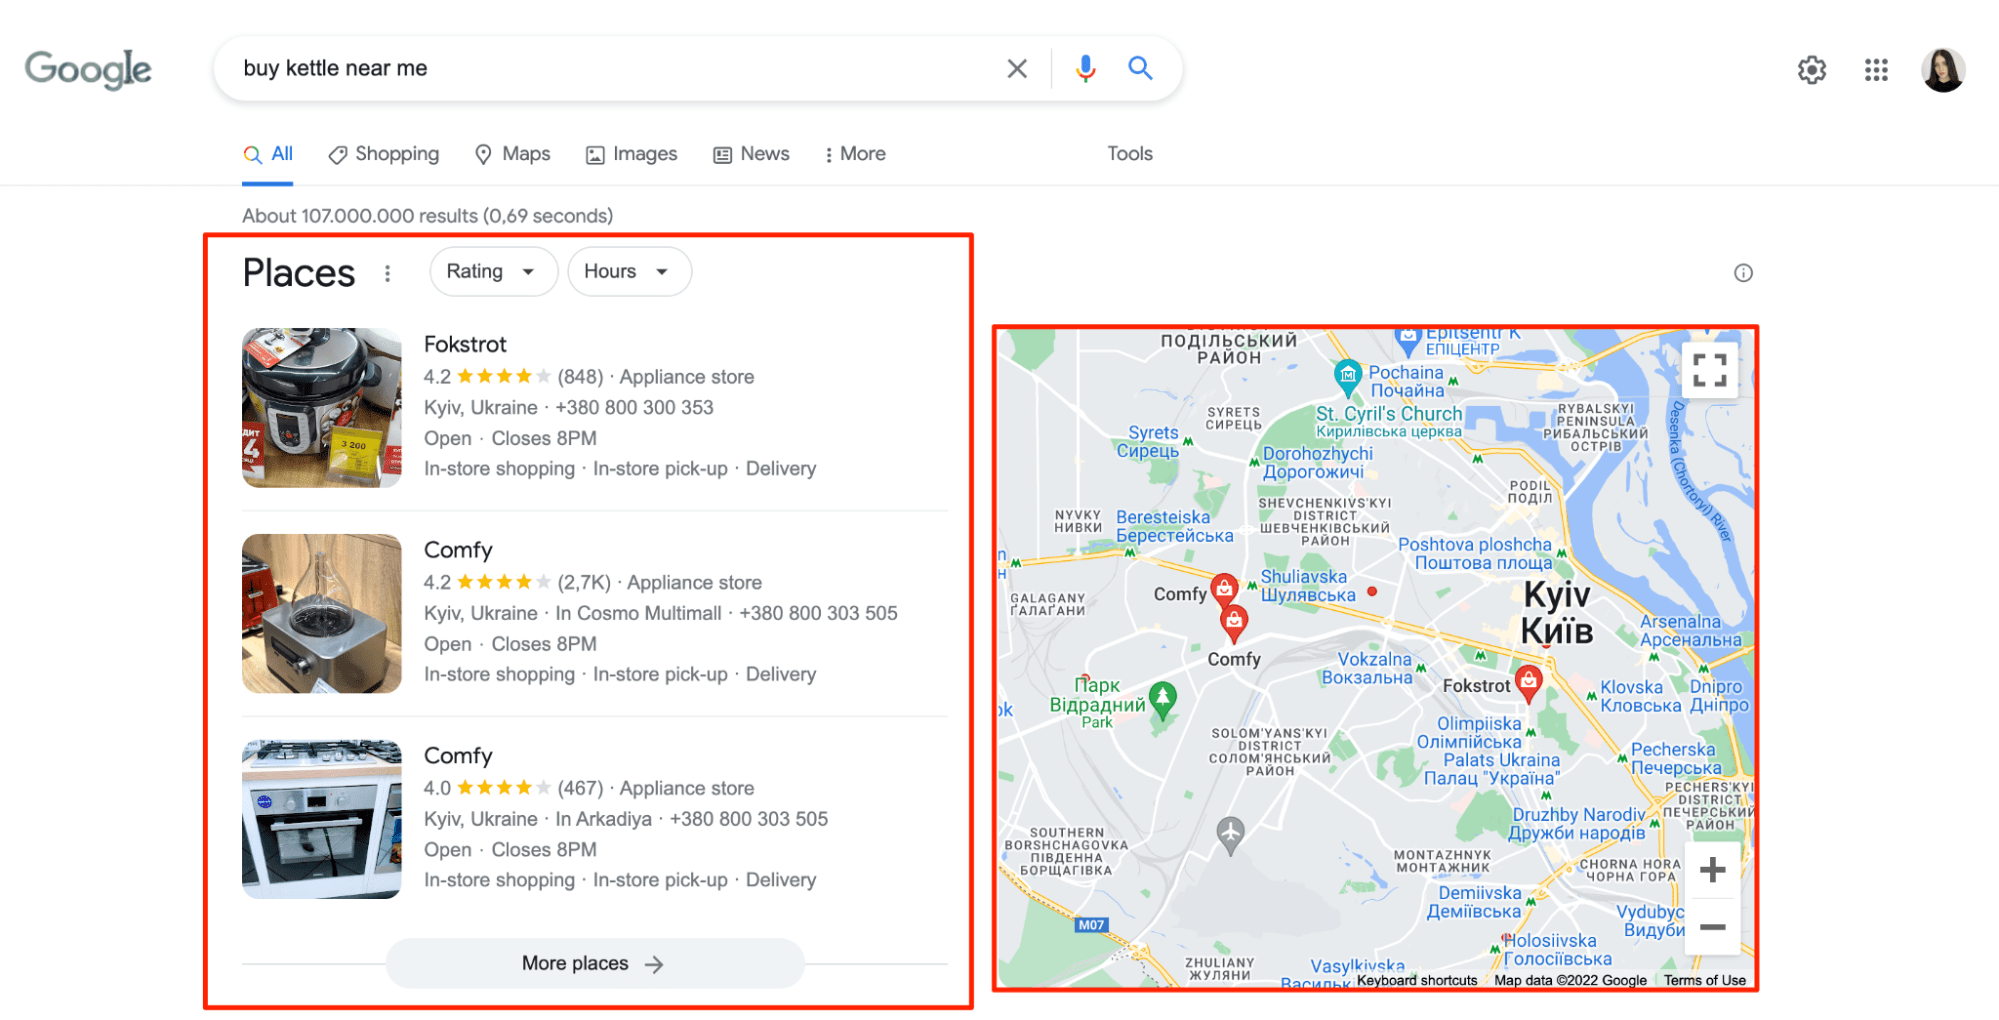 SERP results for transactional intent